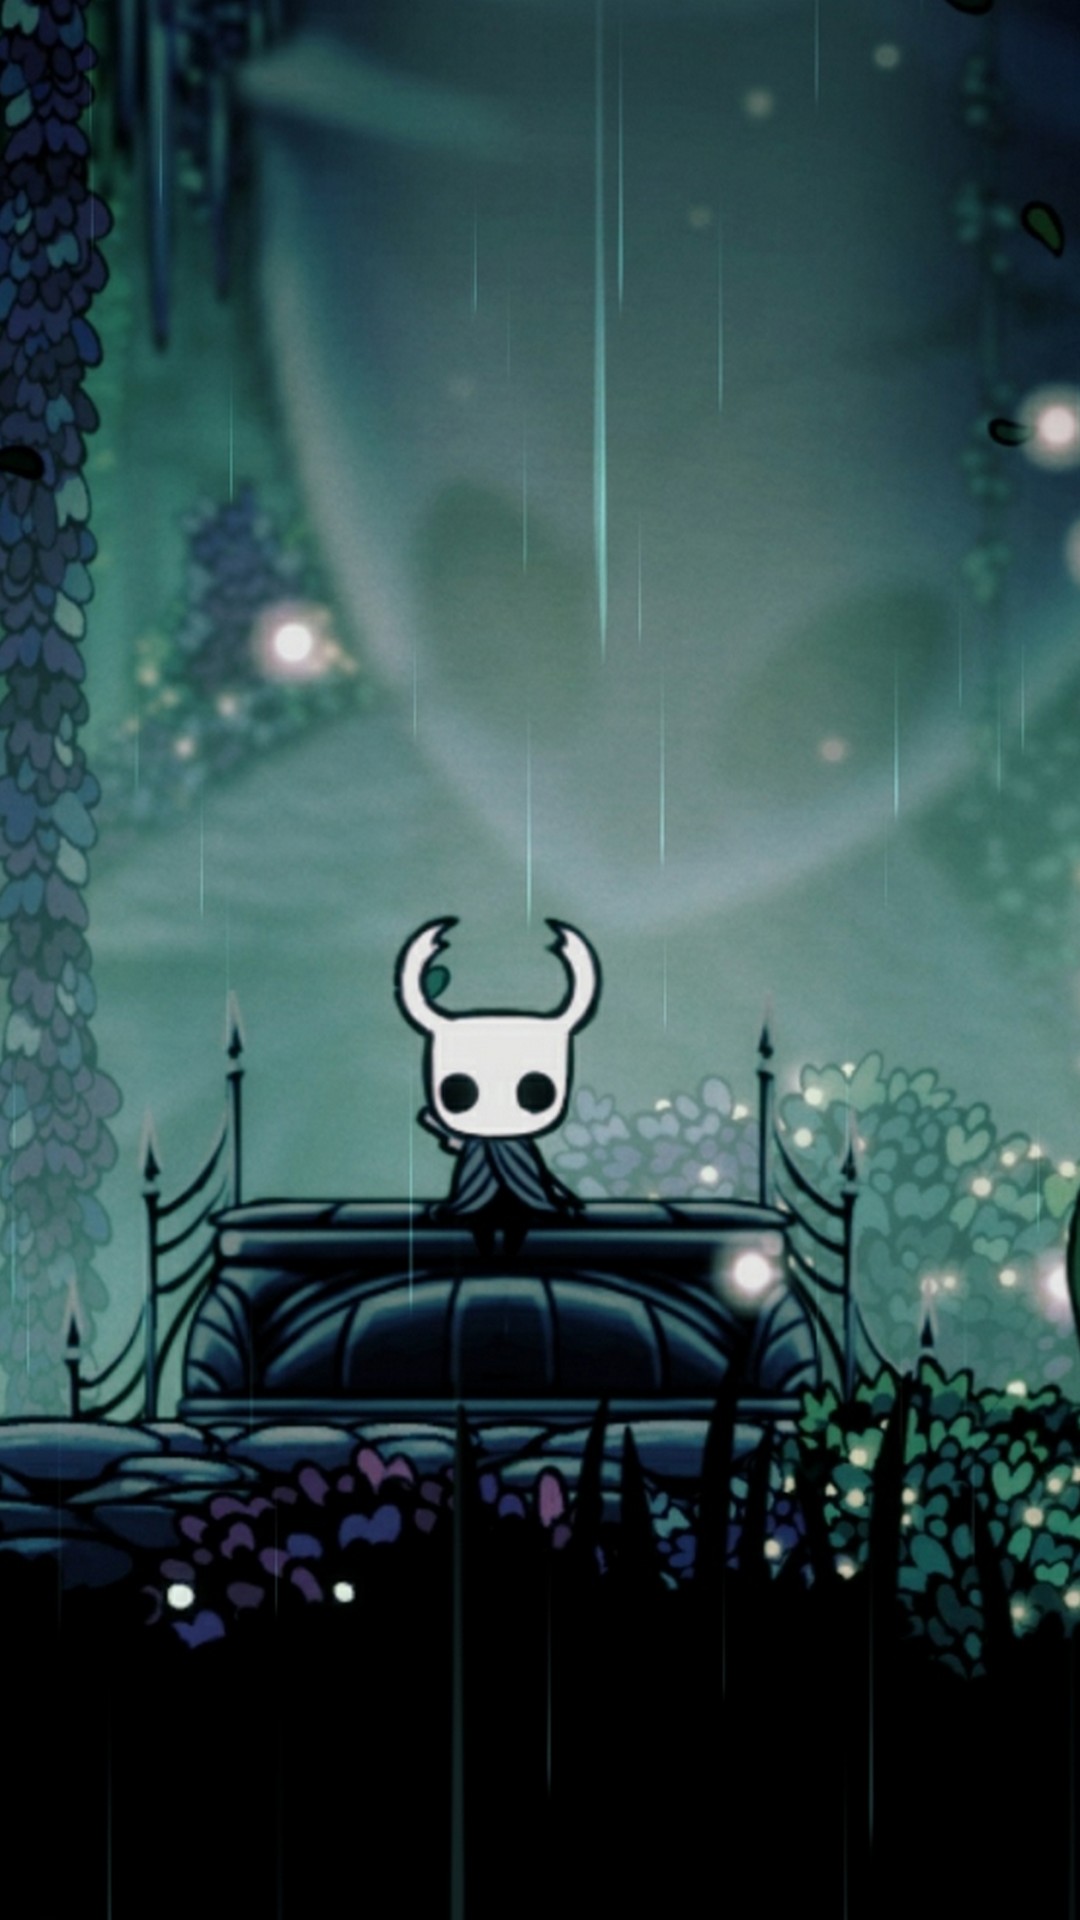 Hollow Knight Gameplay Wallpaper For Android With high-resolution 1080X1920 pixel. You can use this wallpaper for your Android backgrounds, Tablet, Samsung Screensavers, Mobile Phone Lock Screen and another Smartphones device